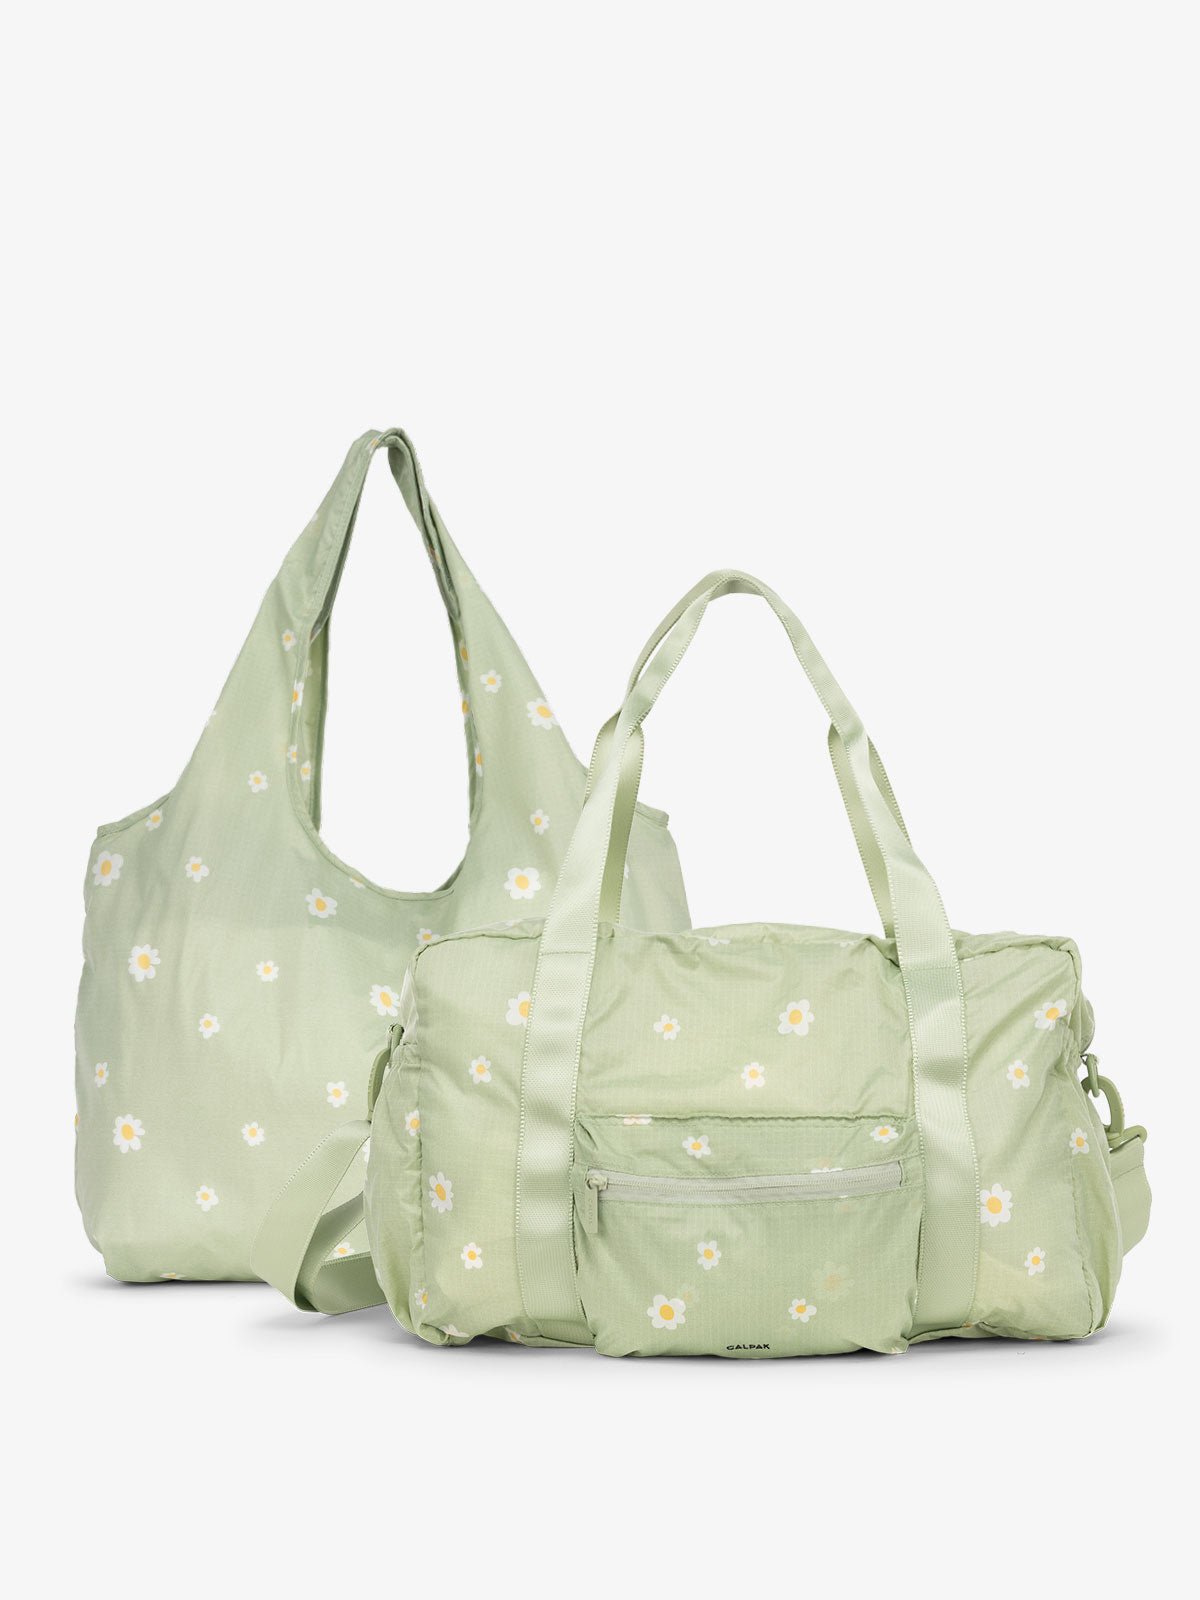 CALPAK Compakt Duo with tote bag and duffel bag in green daisy